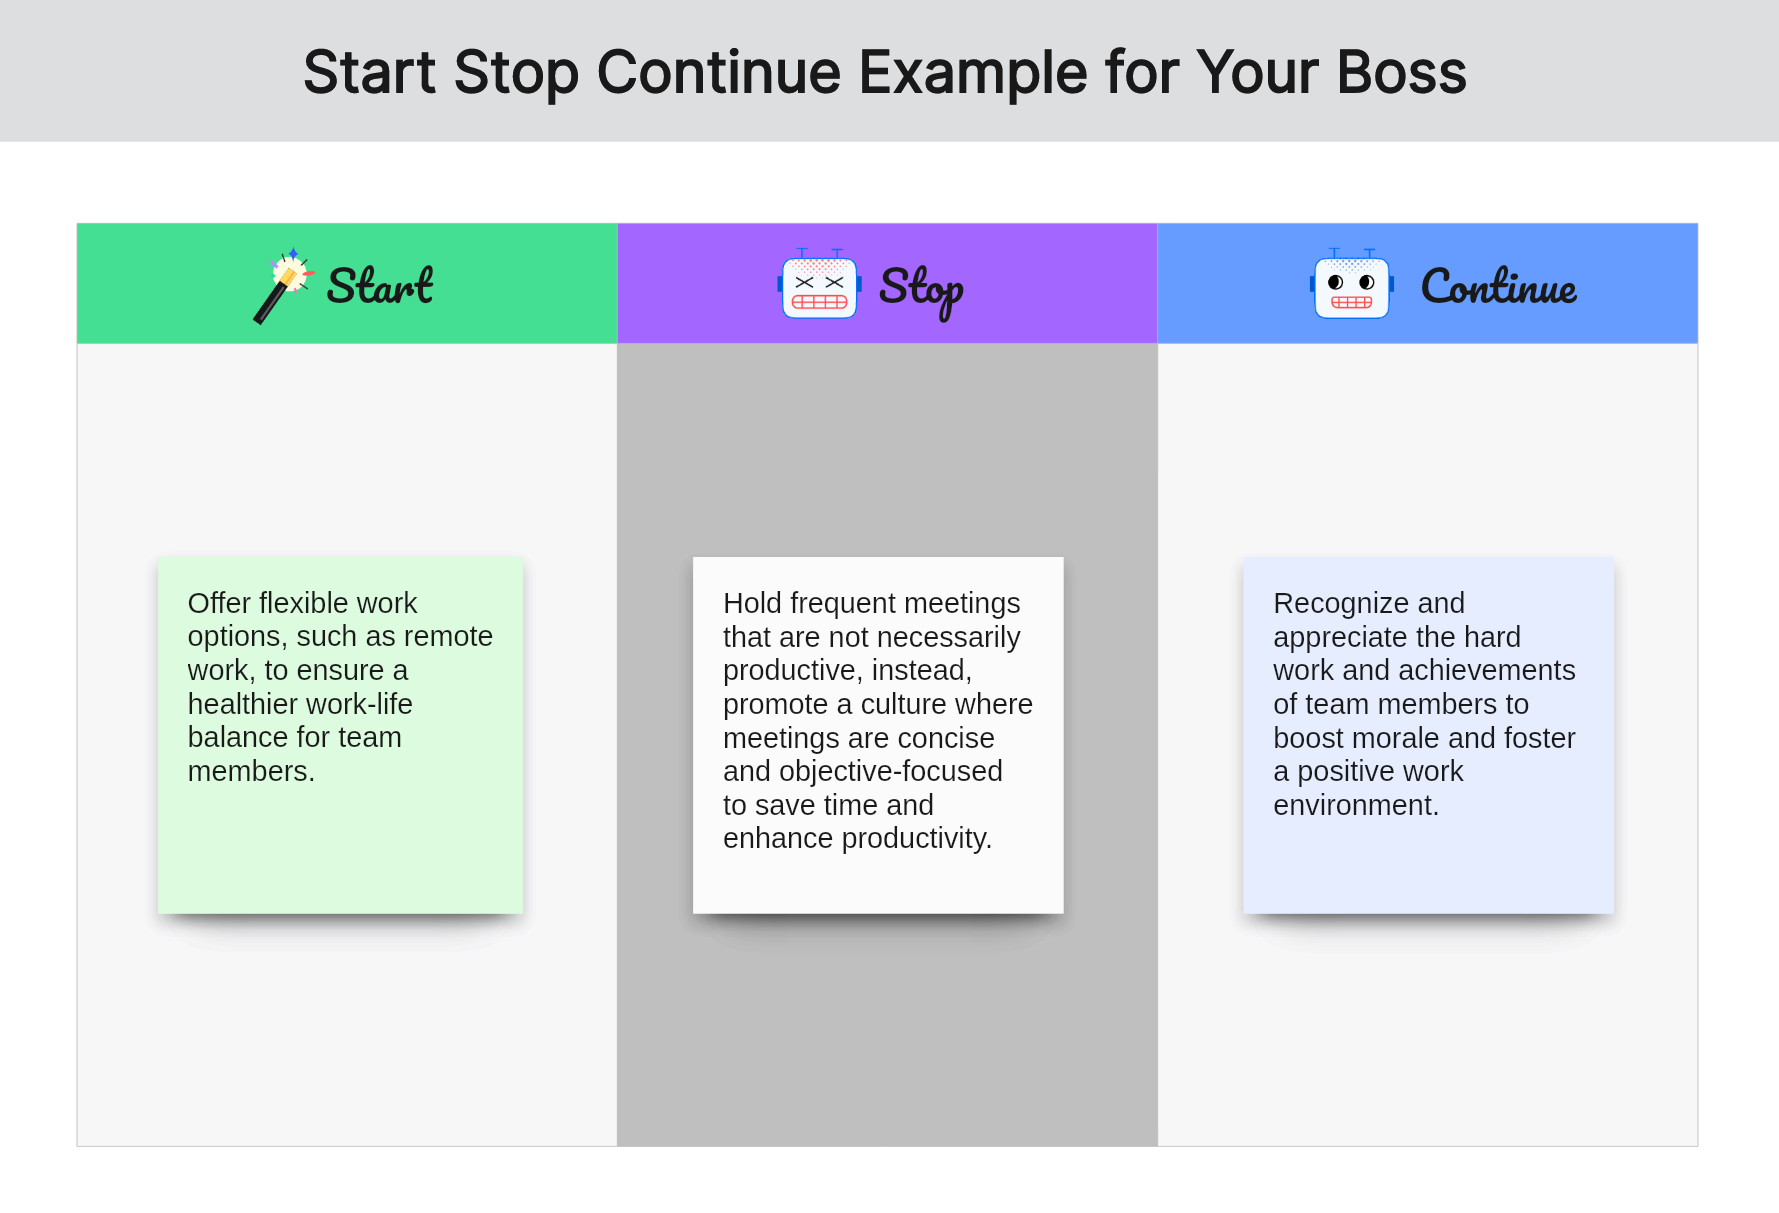 start-stop-continue-examples-for-boss-03